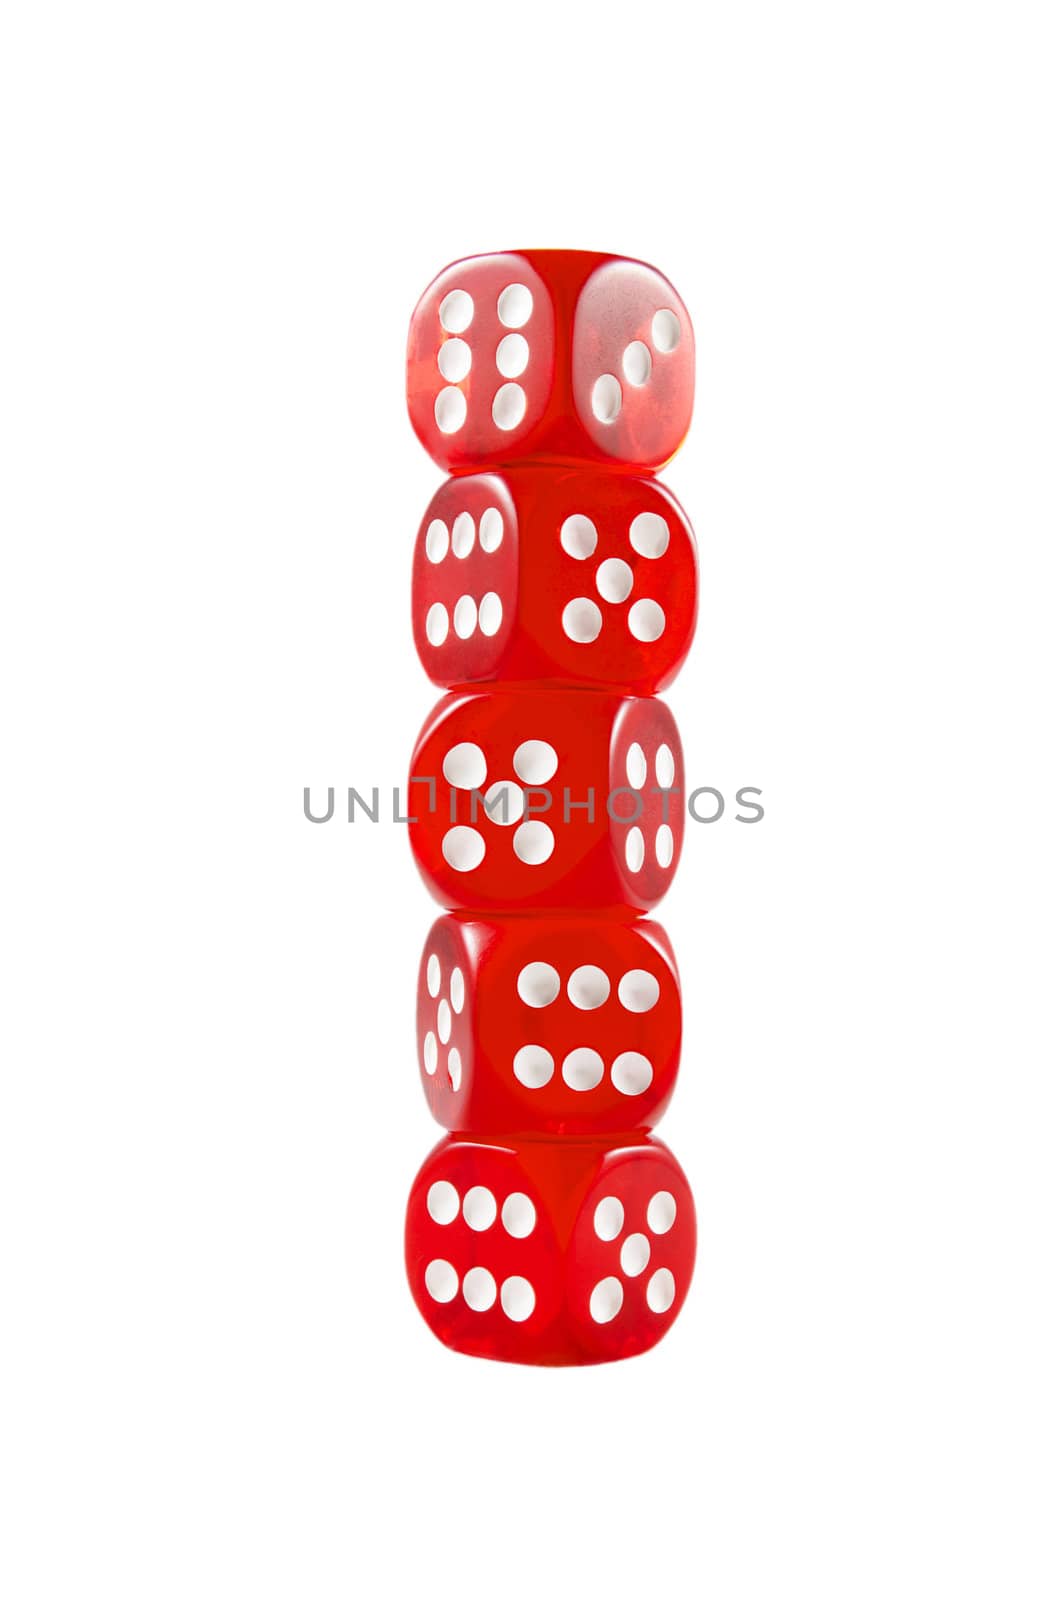 Pile of red dice over white isolated background by HERRAEZ